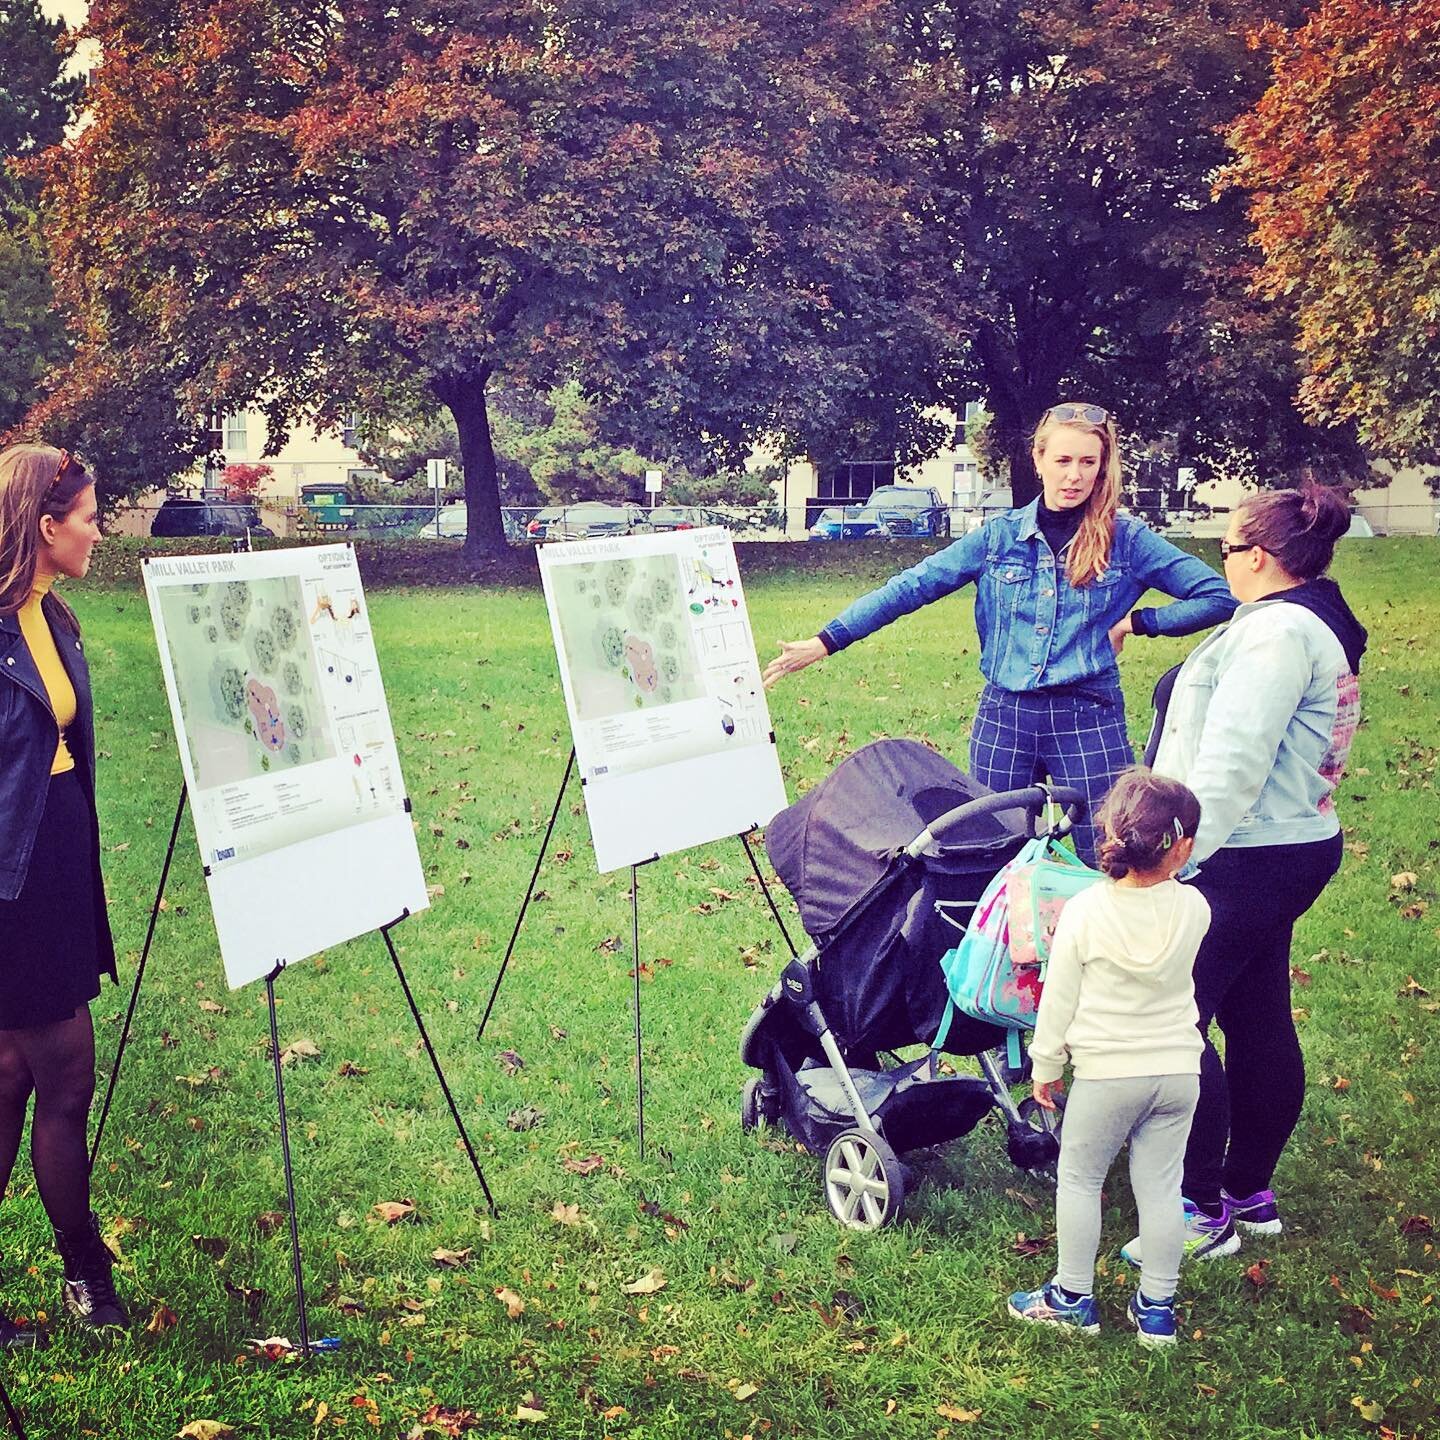 Popup park talk! This Etobicoke park is getting a new playground. It was a pleasure to meet the community surrounding Mill Valley Park on Monday. #parkplanning #community #popup #torontopfr